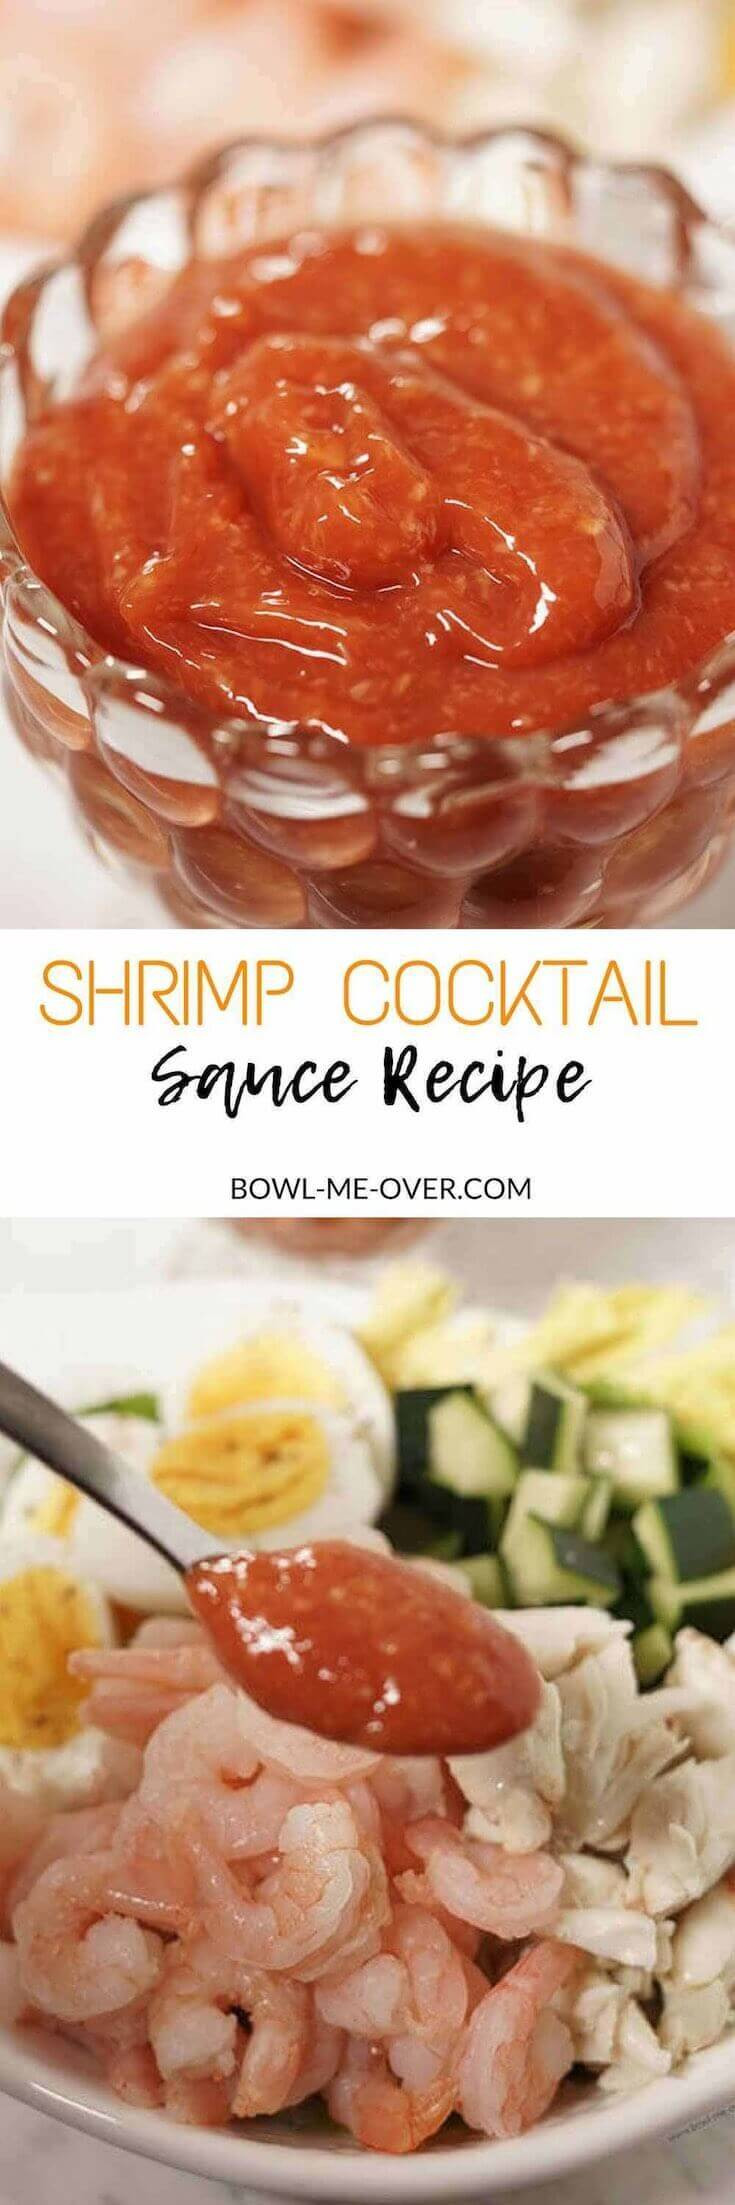 Cocktail Shrimp Sauces
 My Shrimp Cocktail Sauce Recipe is made with sweet ketchup